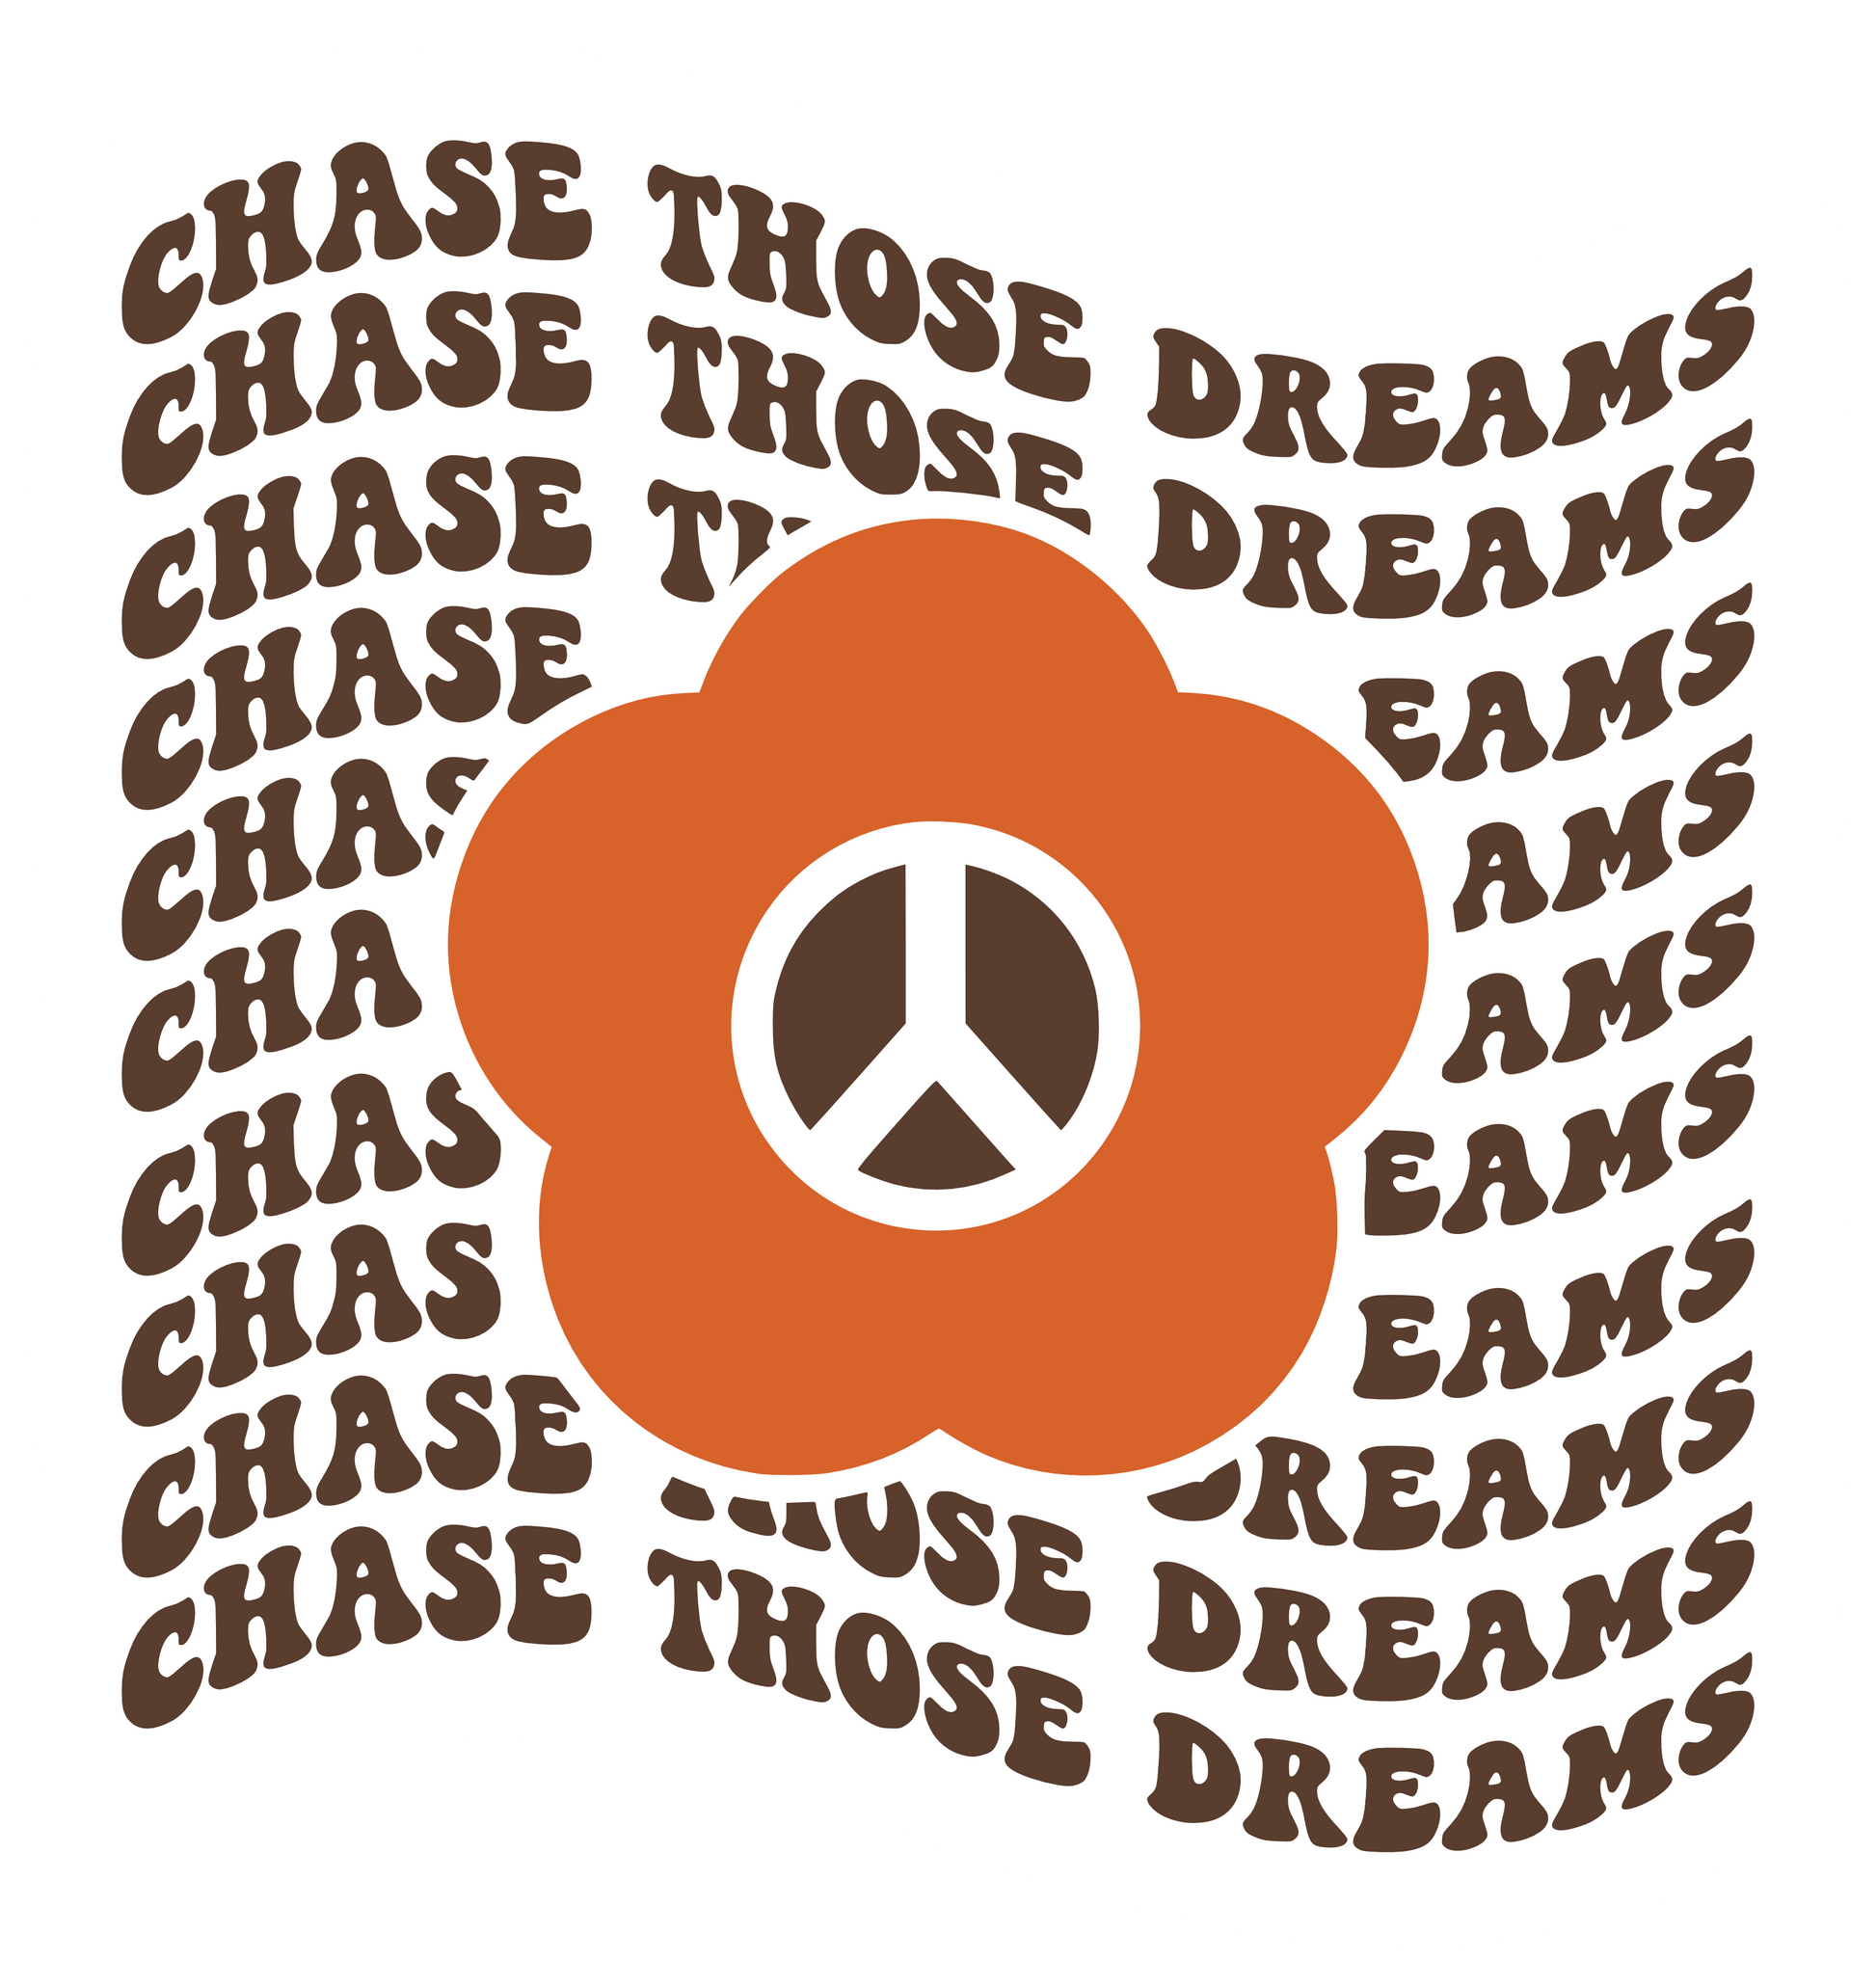 a sticker with a white background and chase those dreams in a brown retro font in a wave shape behind a retro orange daisy with a brown and white peace sign in the center.